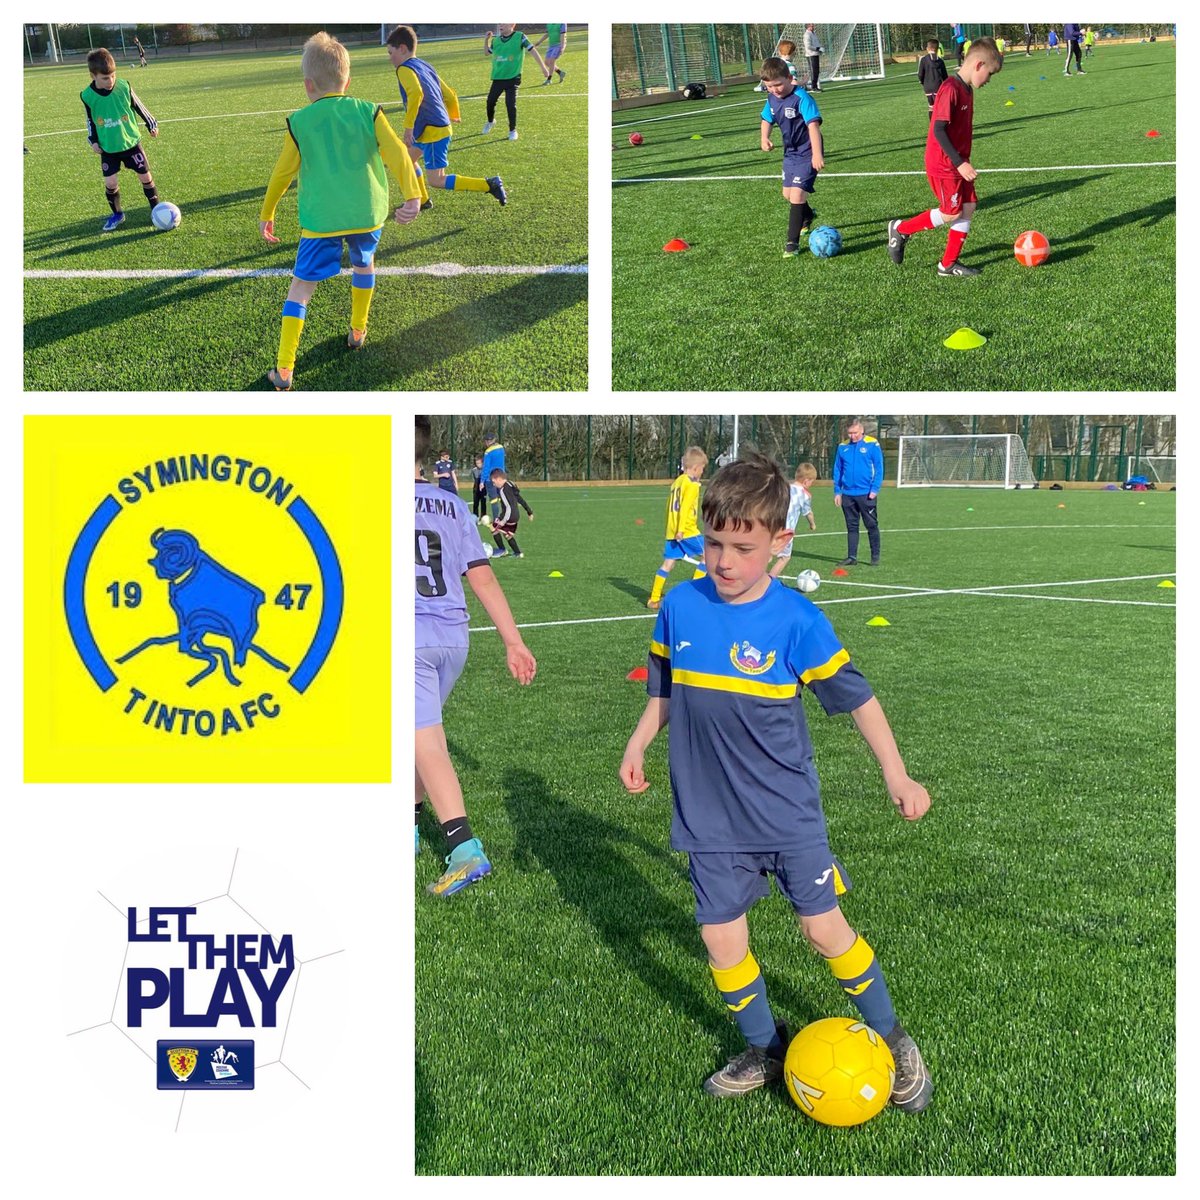 #PowerOfFootball | Every young @SymTinto 2015/16 getting 100s of touches on the ⚽️ using the Network Intro activity 🤩 4v4 waves of attack with a focus on speed & width 👍🏼 & lots of game time too 👏🏼🔥 Another lovely night in the ☀️ at their stunning new facility ❤️ #LetThemPlay